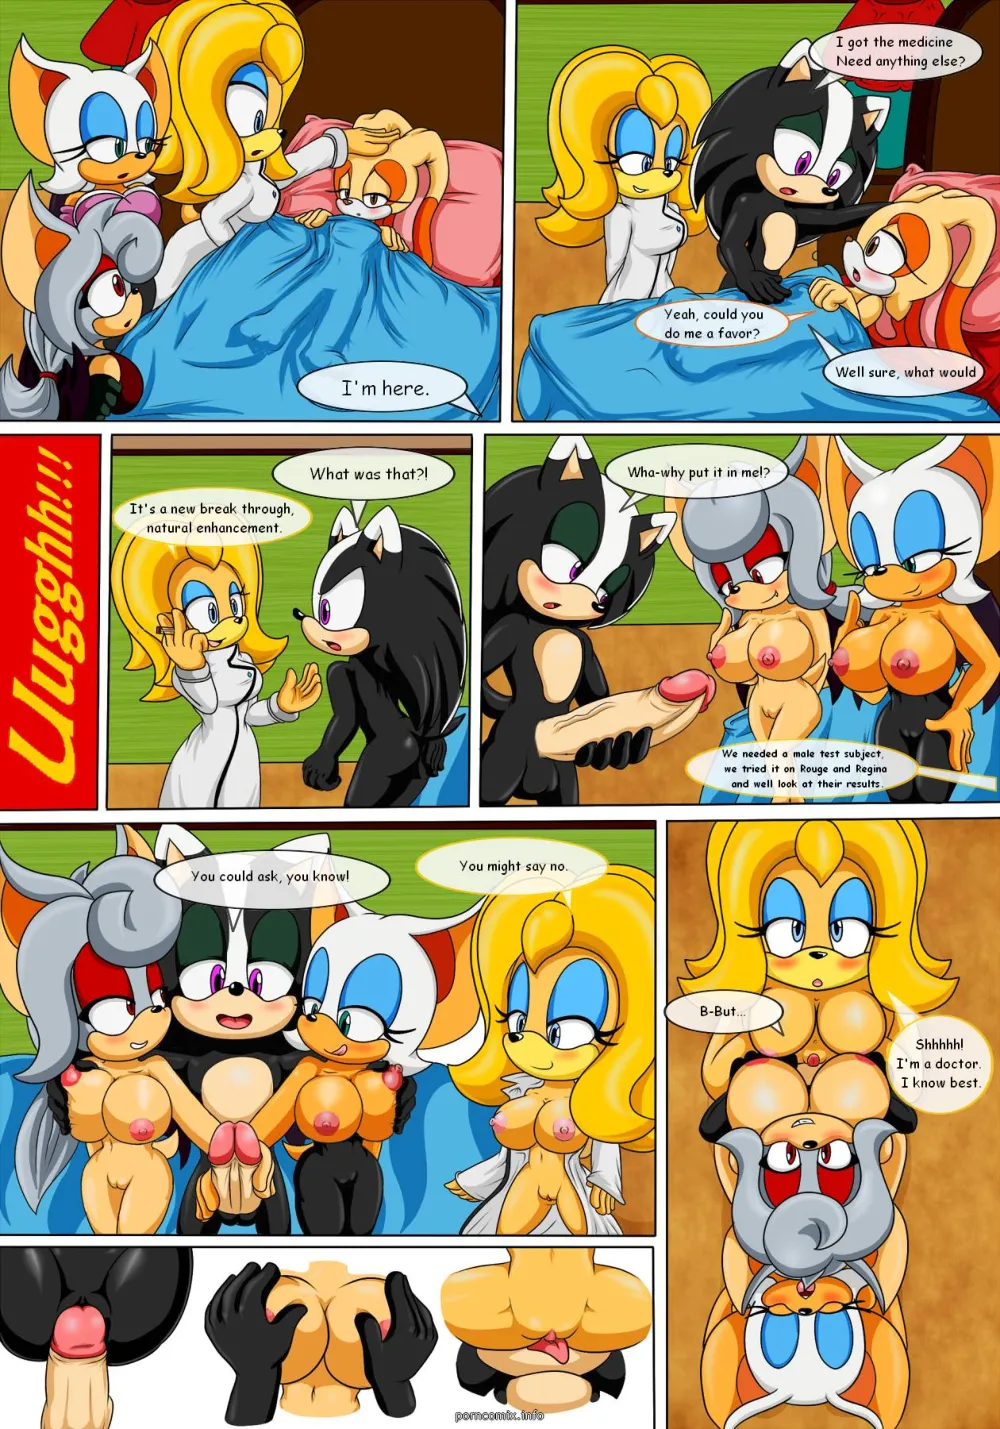 Test Subject (Sonic The Hedgehog) - Page 1